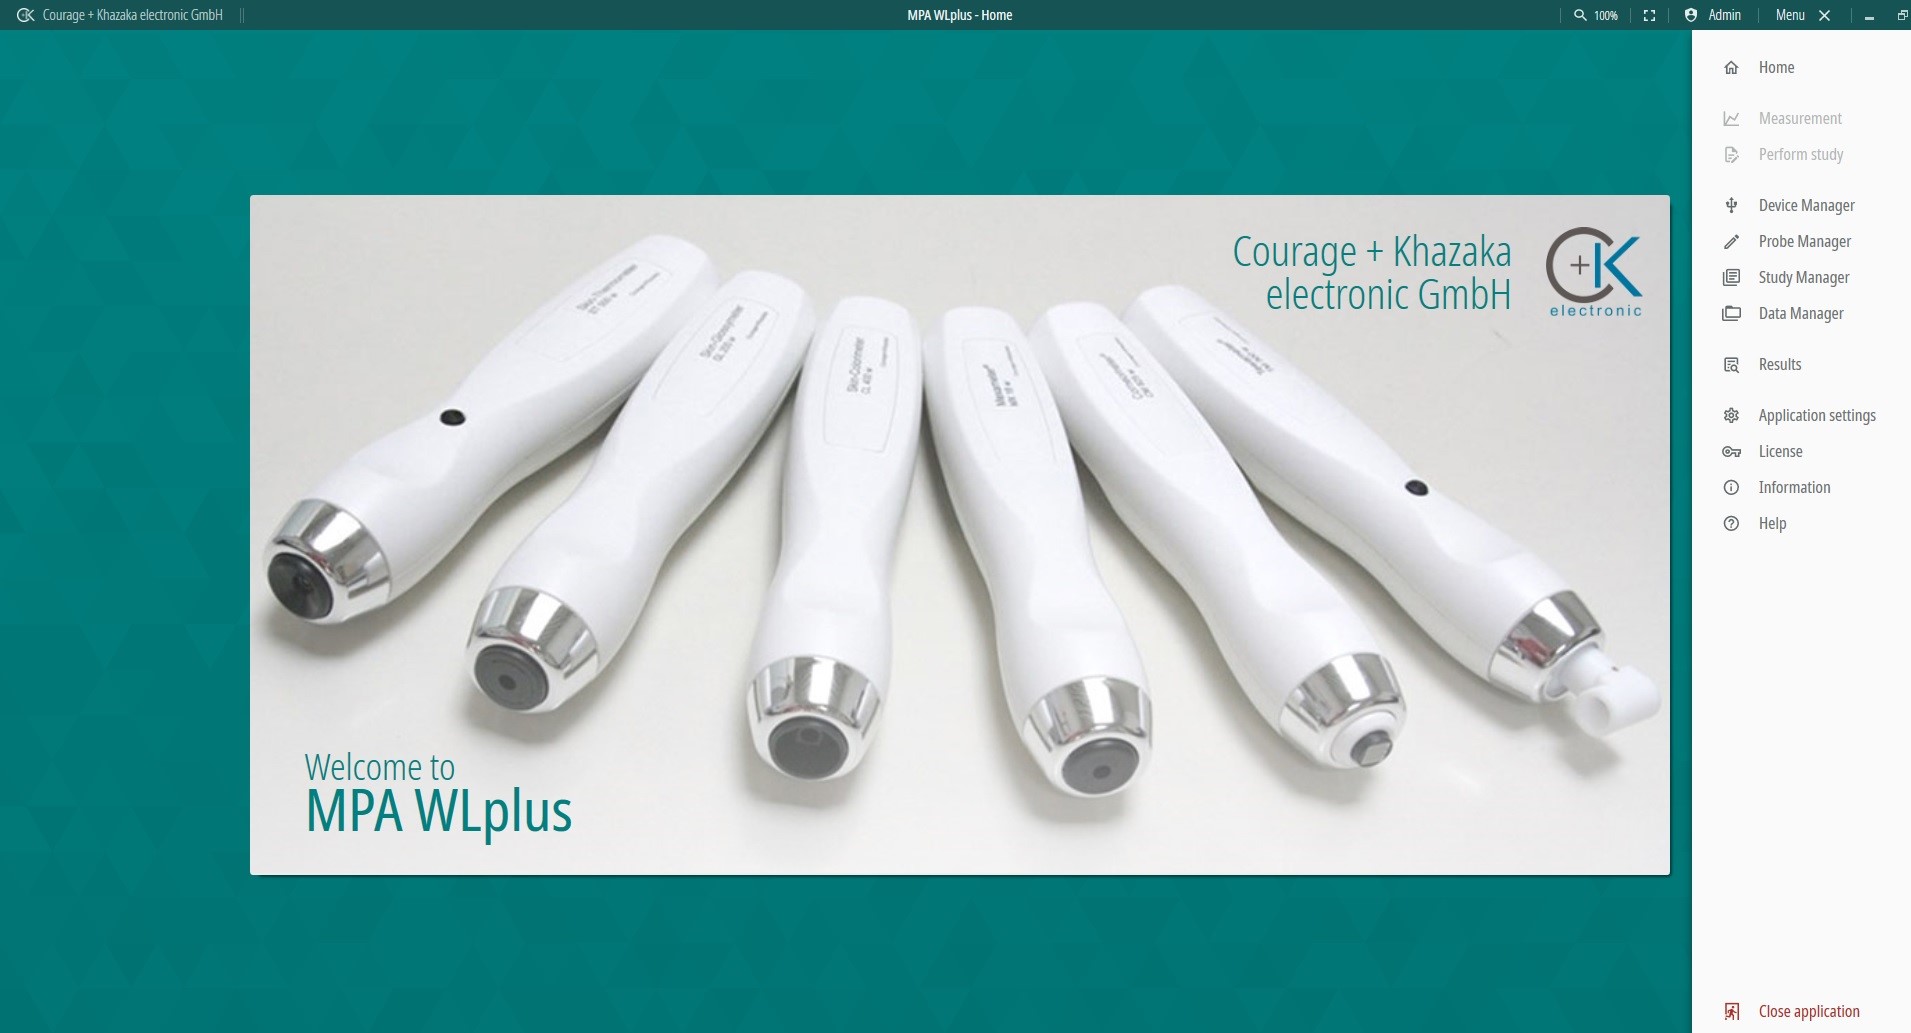 MPA WLplus software for the C+K wireless probes